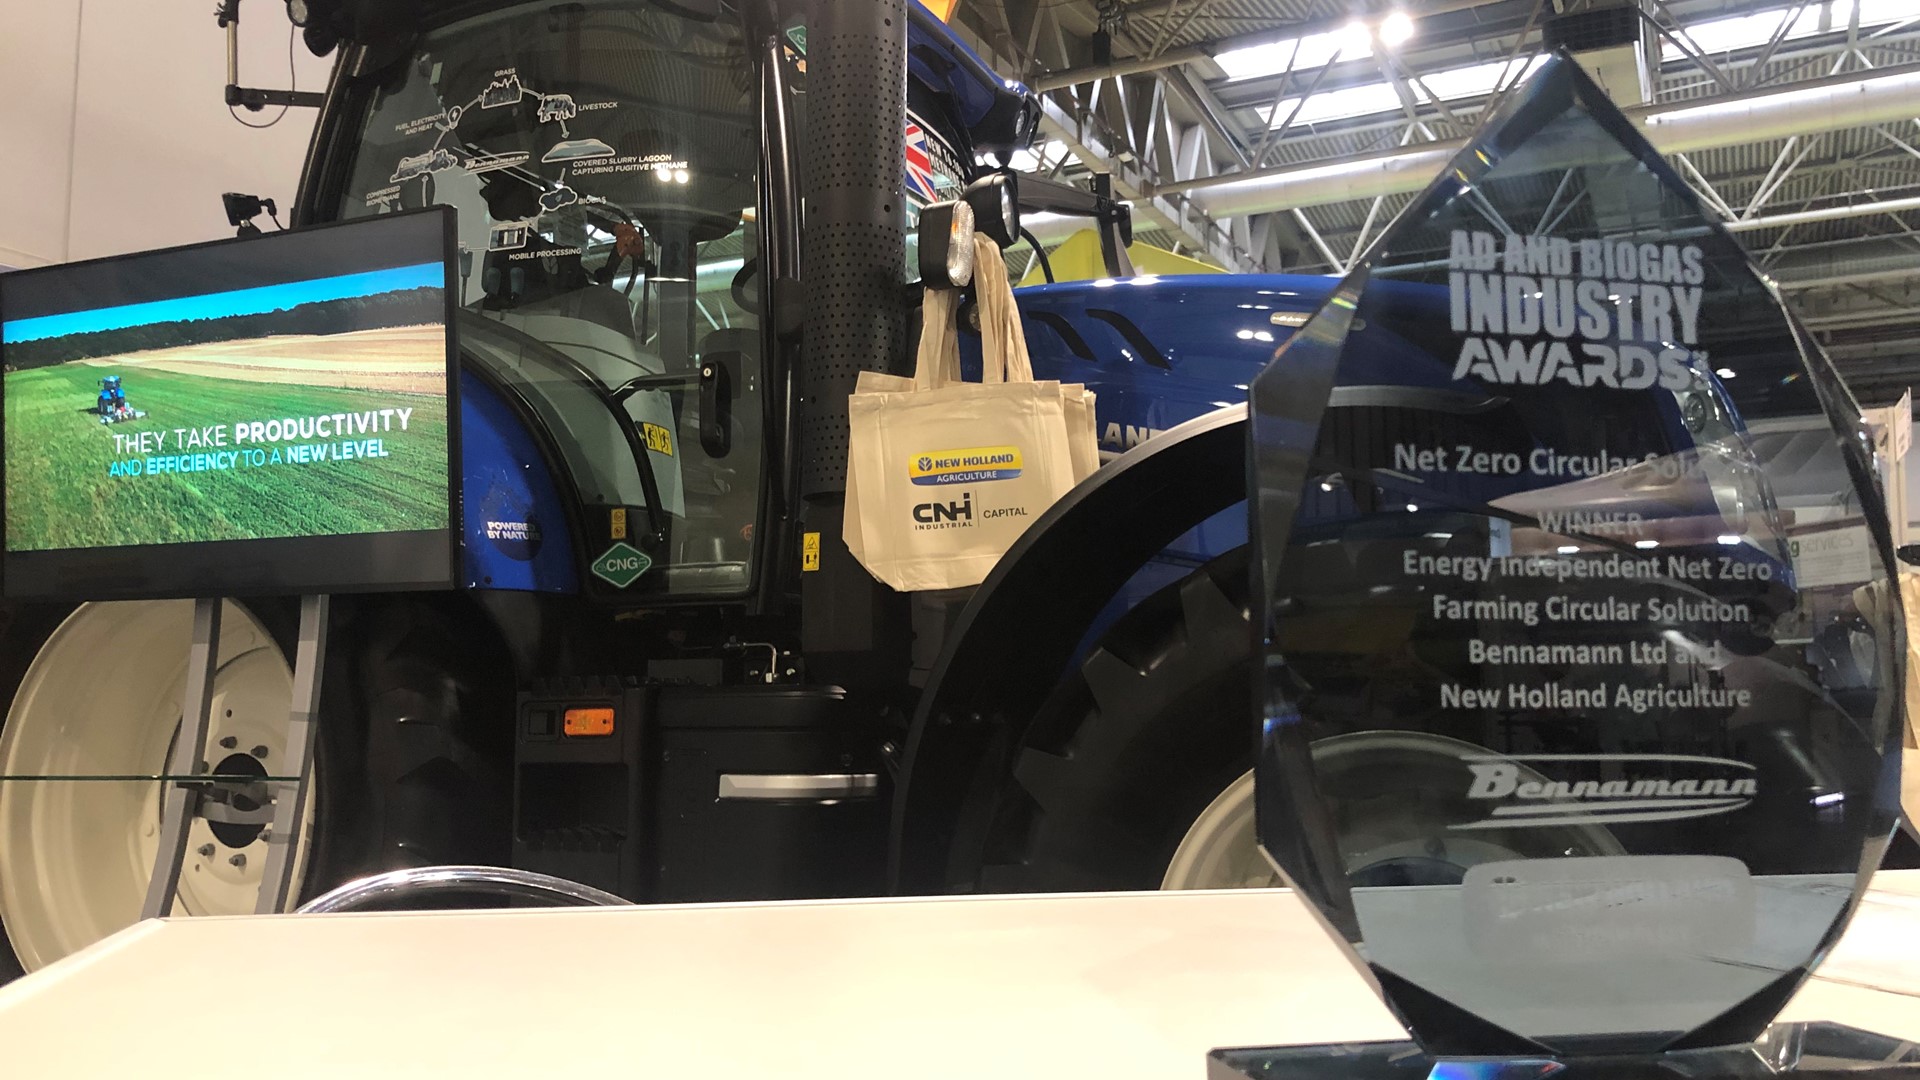 New Holland and Bennamann solutions win 2023 AD and Biogas Industry Award